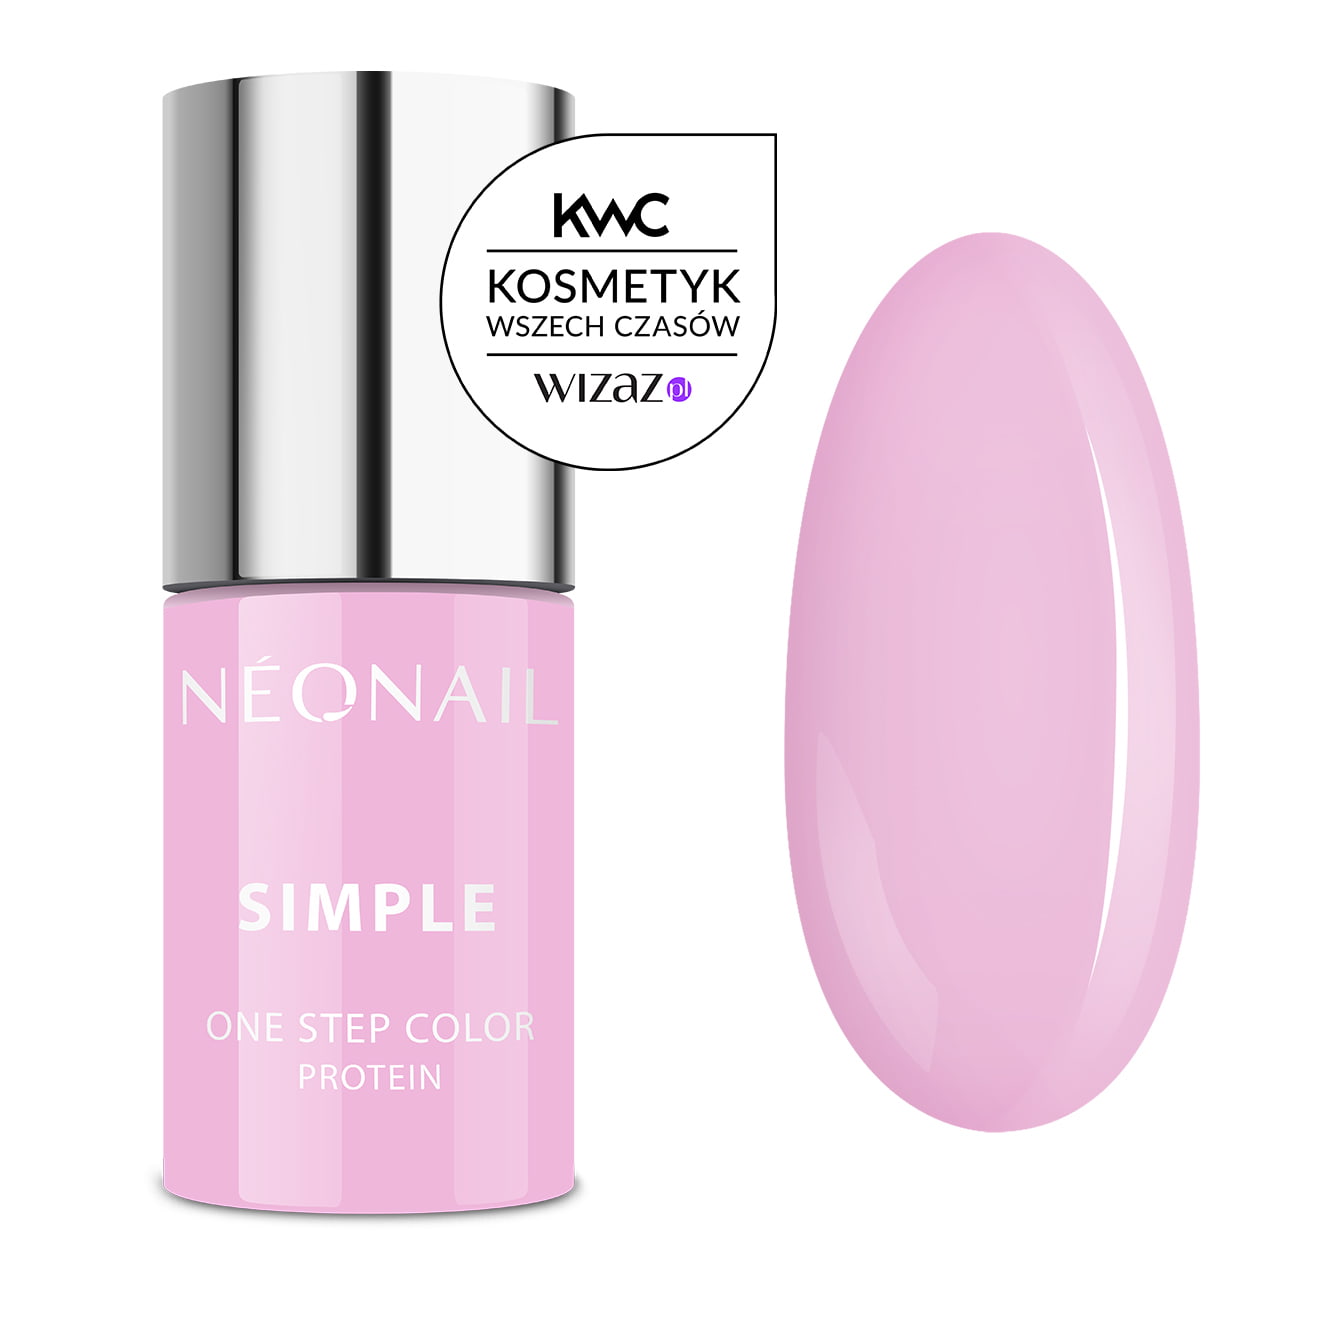 NeoNail Simple One Step Color Protein 7,2ml - Fluffy